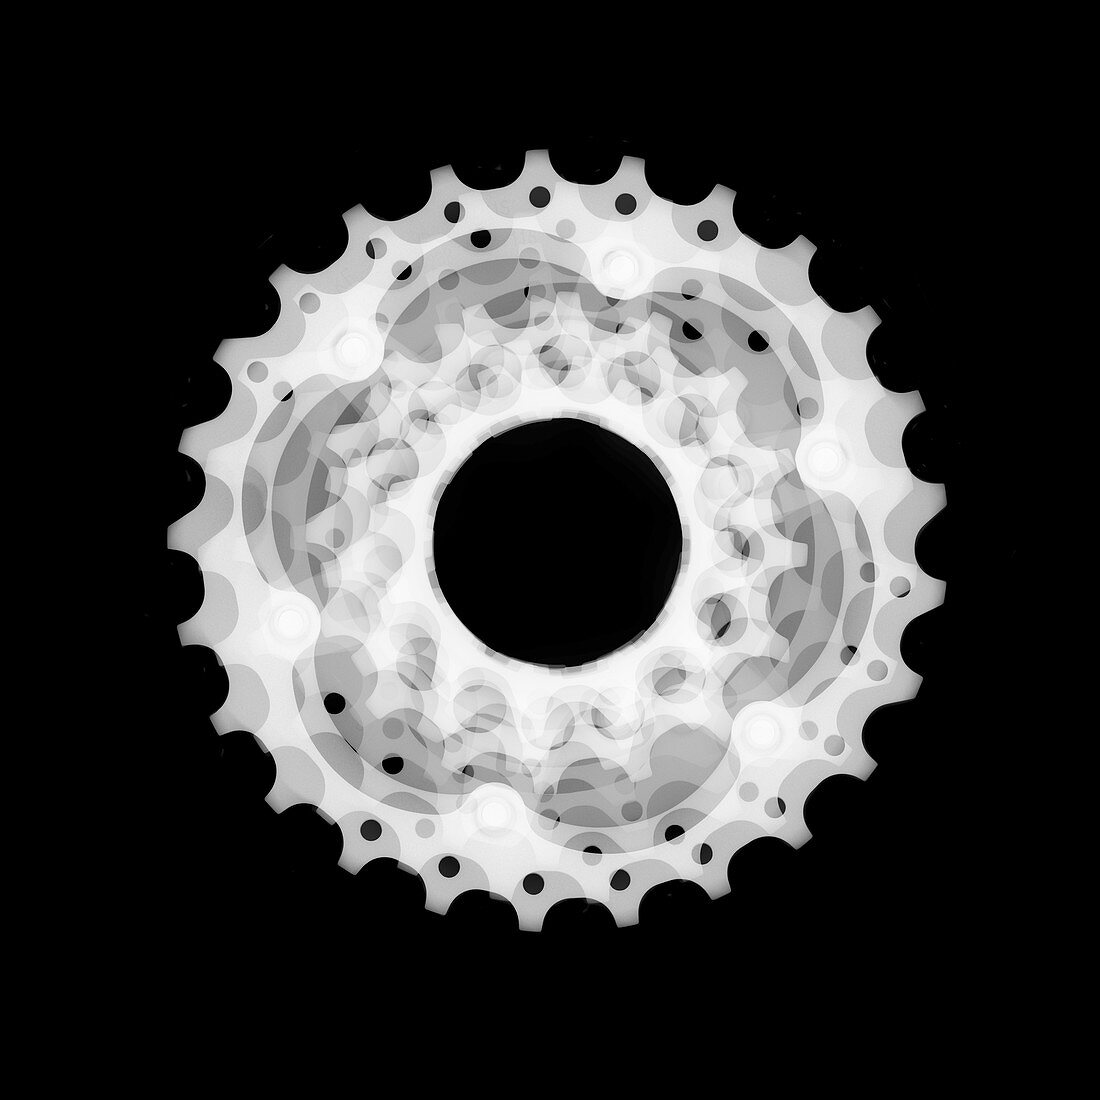 Bicycle gears, X-ray